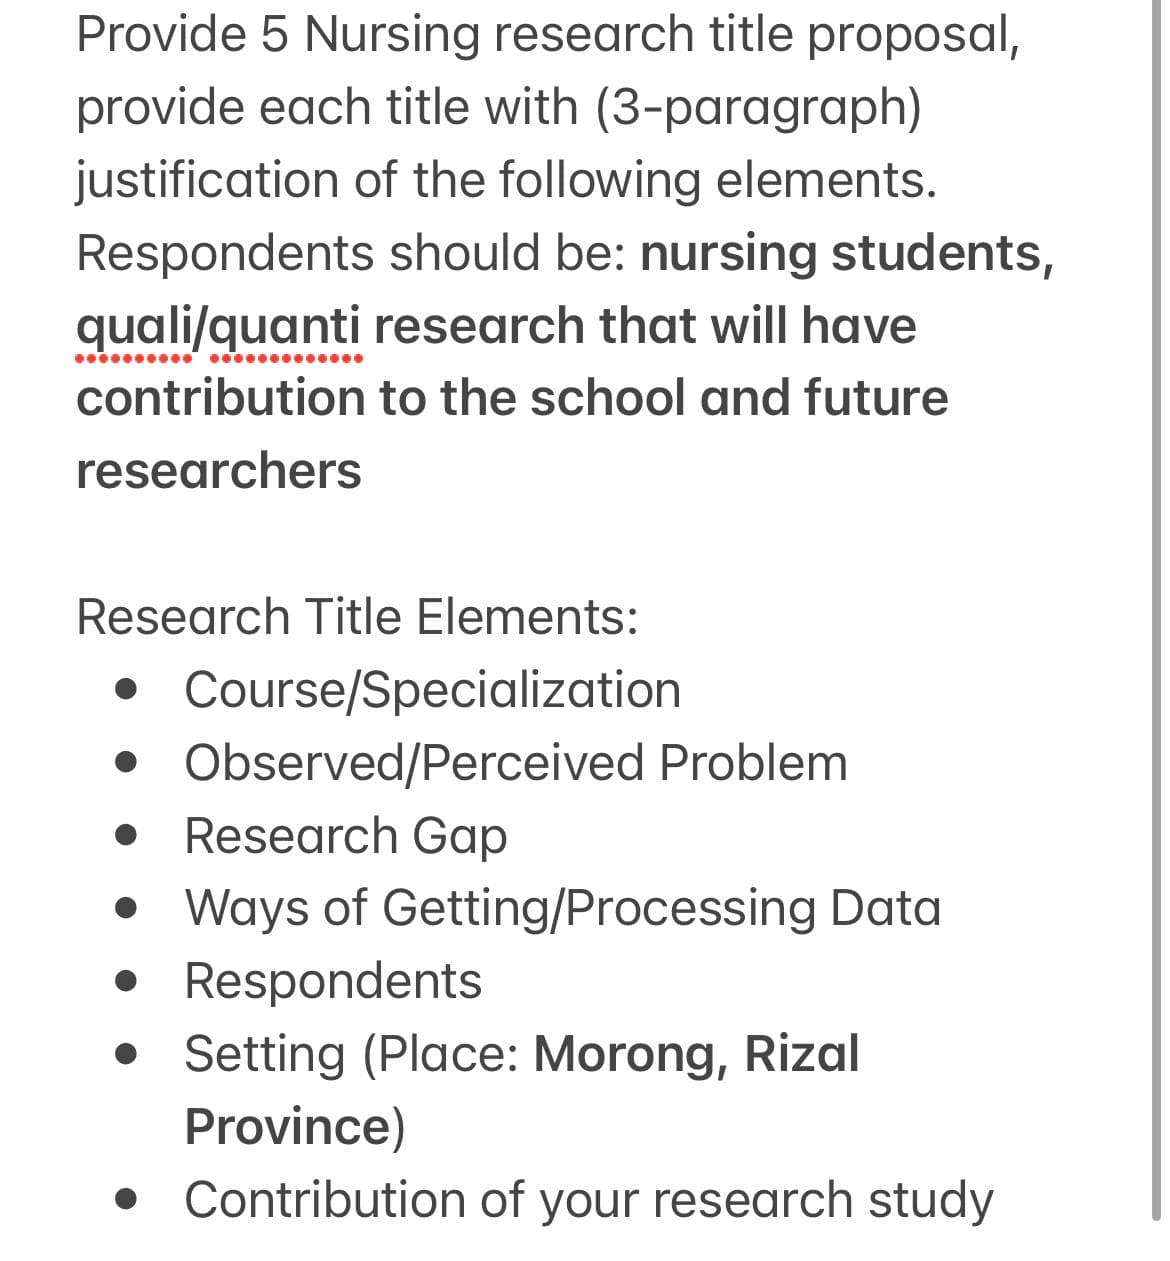 Provide 5 Nursing research title proposal,
provide each title with (3-paragraph)
justification of the following elements.
Respondents should be: nursing students,
quali/quanti research that will have
contribution to the school and future
researchers
●●●●●●●●●●●●●
Research Title Elements:
• Course/Specialization
• Observed/Perceived Problem
• Research Gap
• Ways of Getting/Processing Data
• Respondents
• Setting (Place: Morong, Rizal
Province)
Contribution of your research study